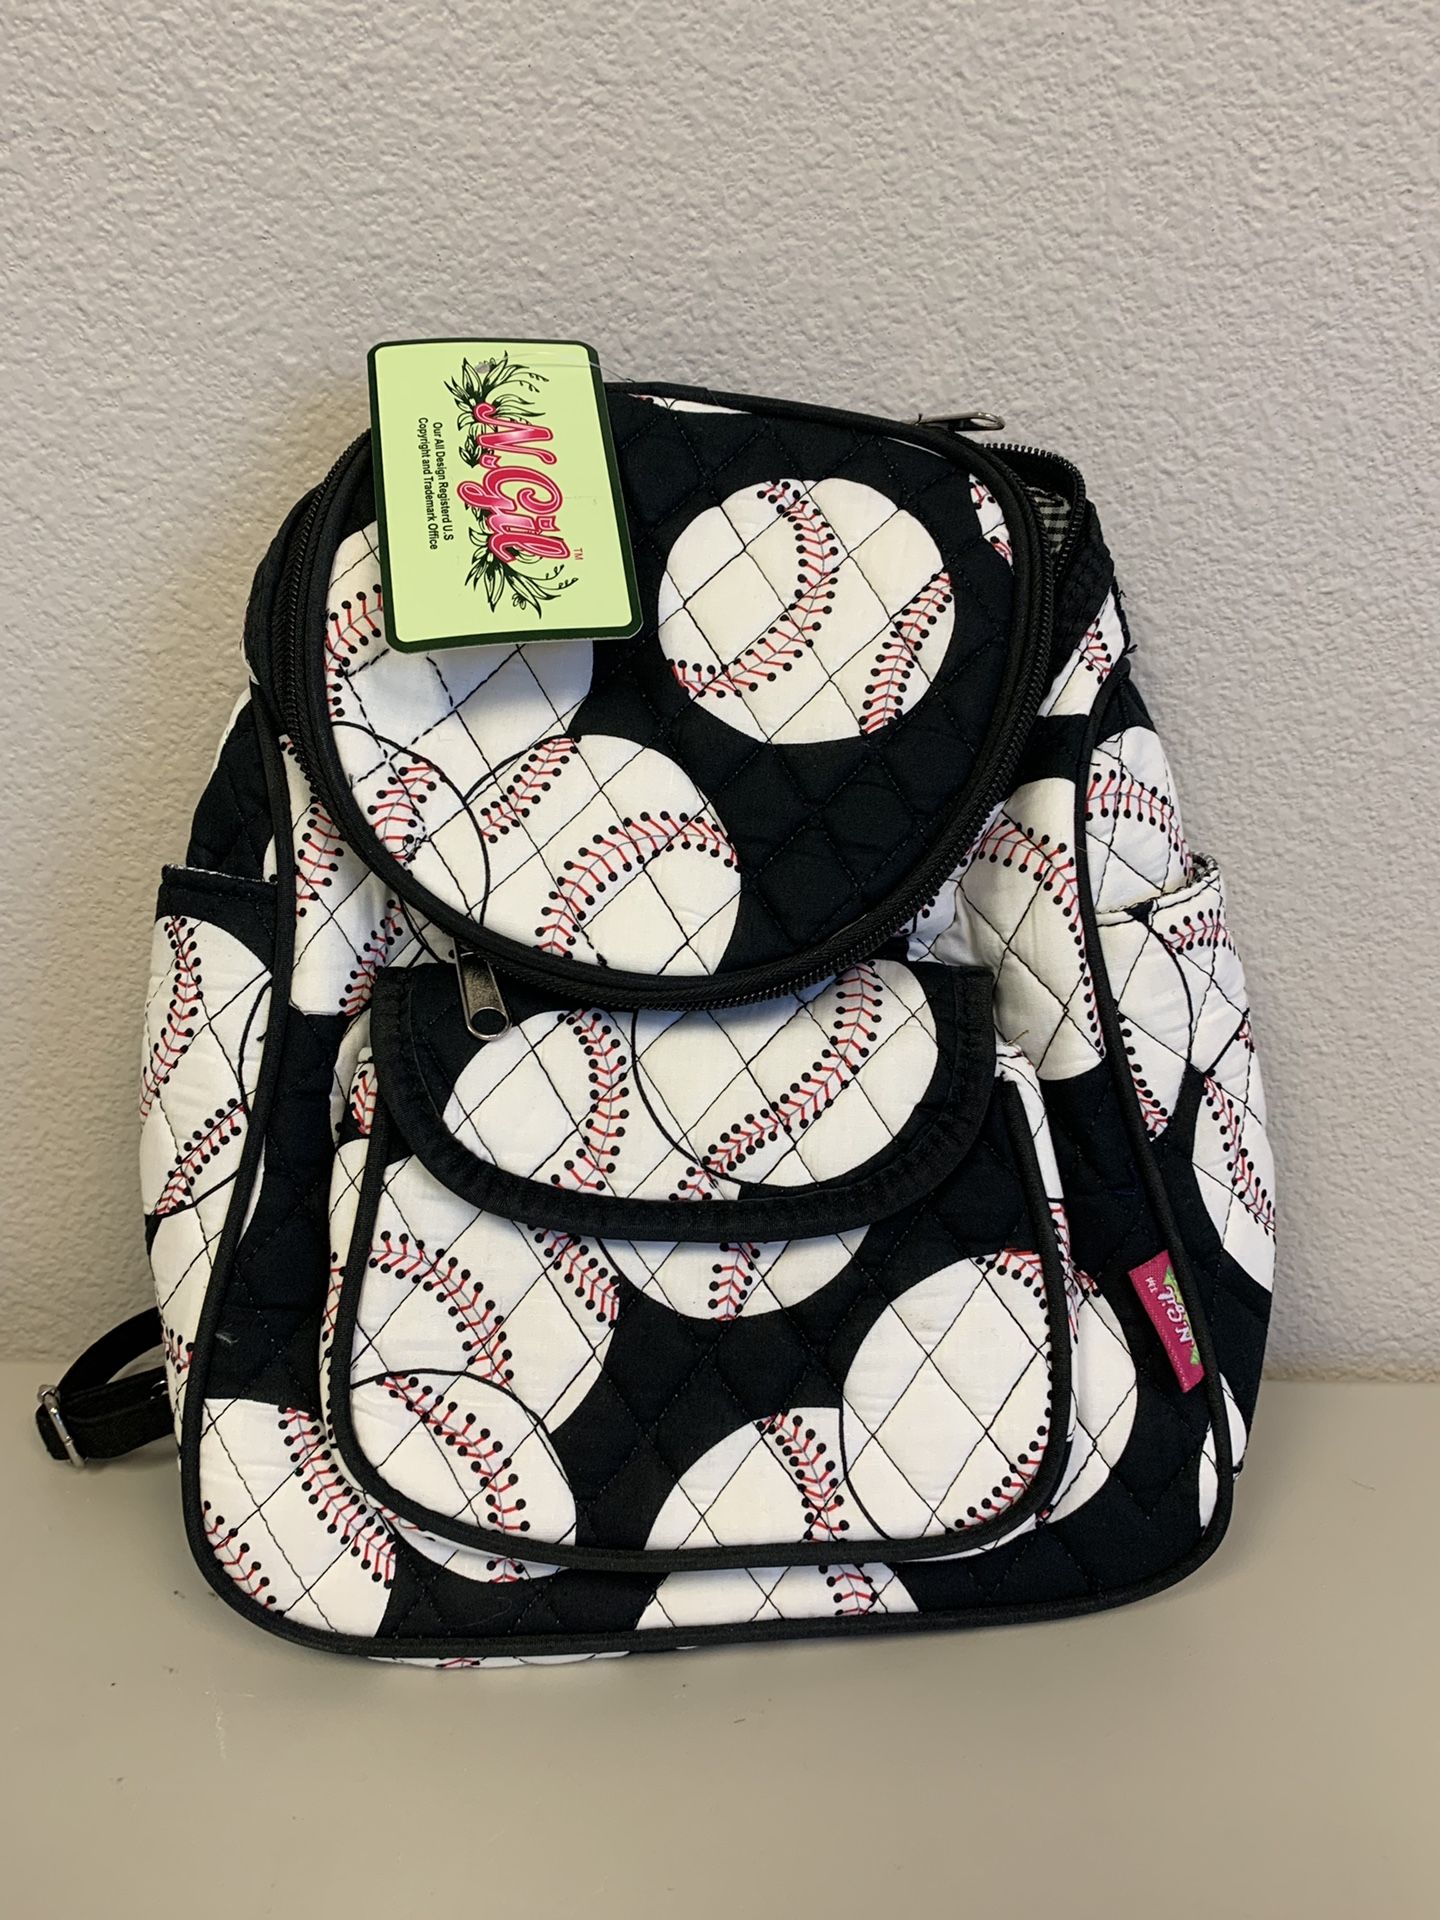 Mini Quilted Backpack- Baseball Print. Perfect for teens and kids. Sling bag.